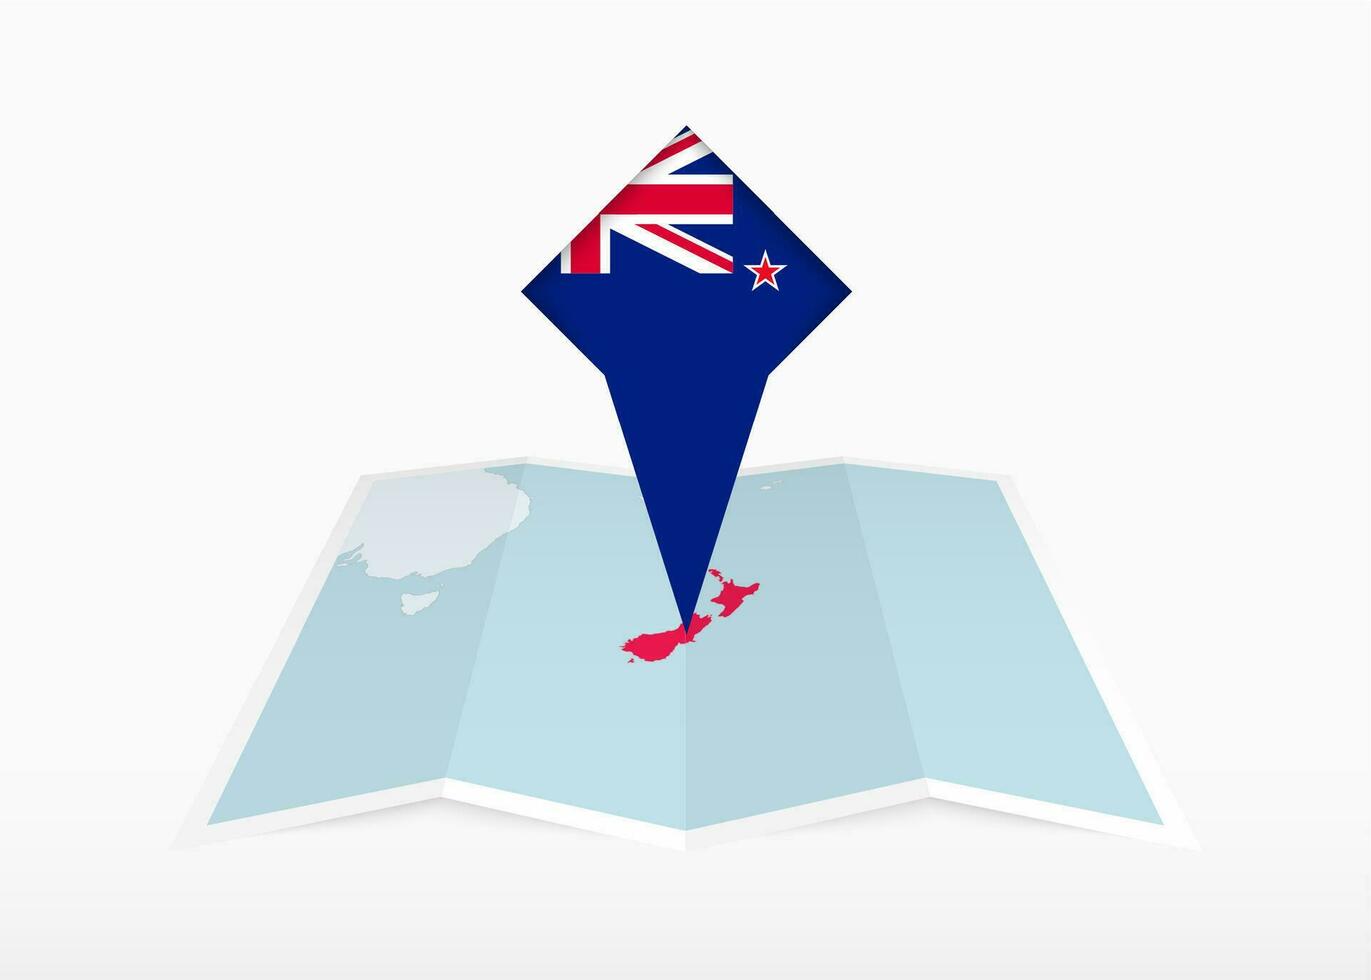 New Zealand is depicted on a folded paper map and pinned location marker with flag of New Zealand. vector